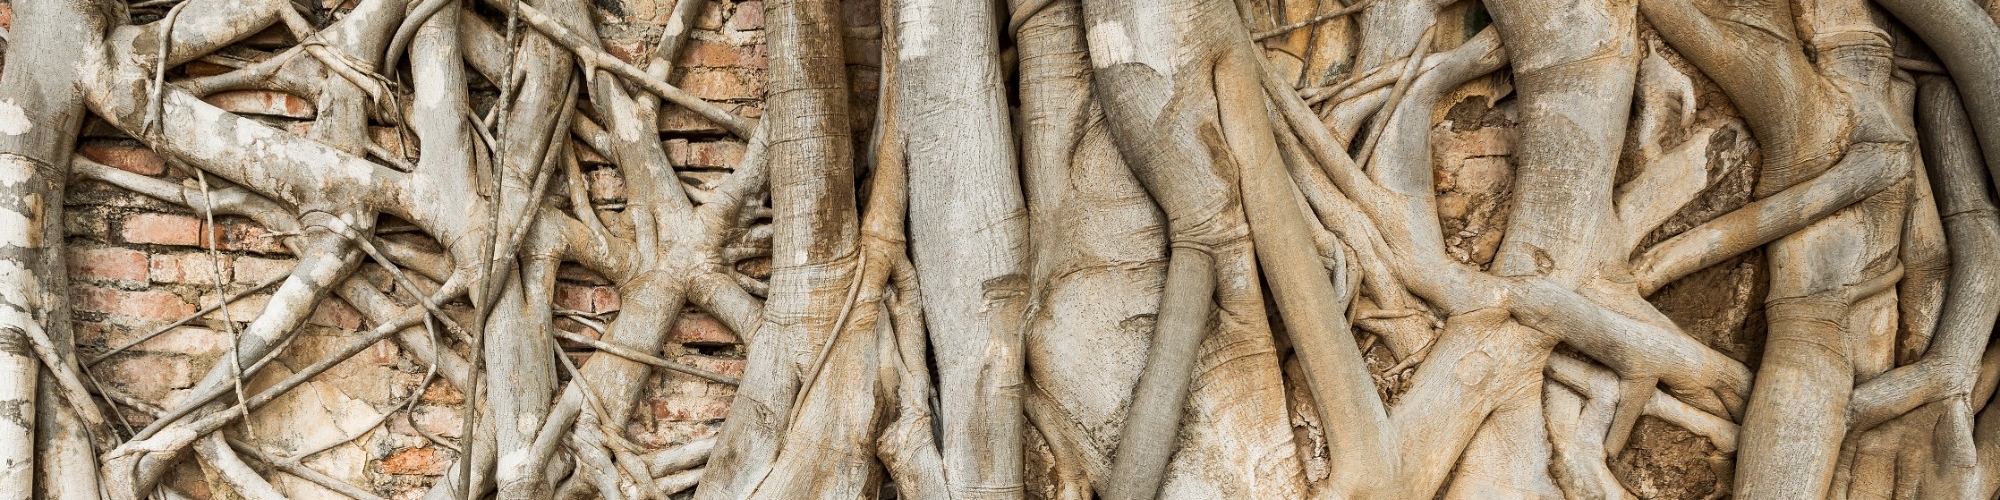 An image of Banyan treet roots growing over and through a red-clay brick wall.